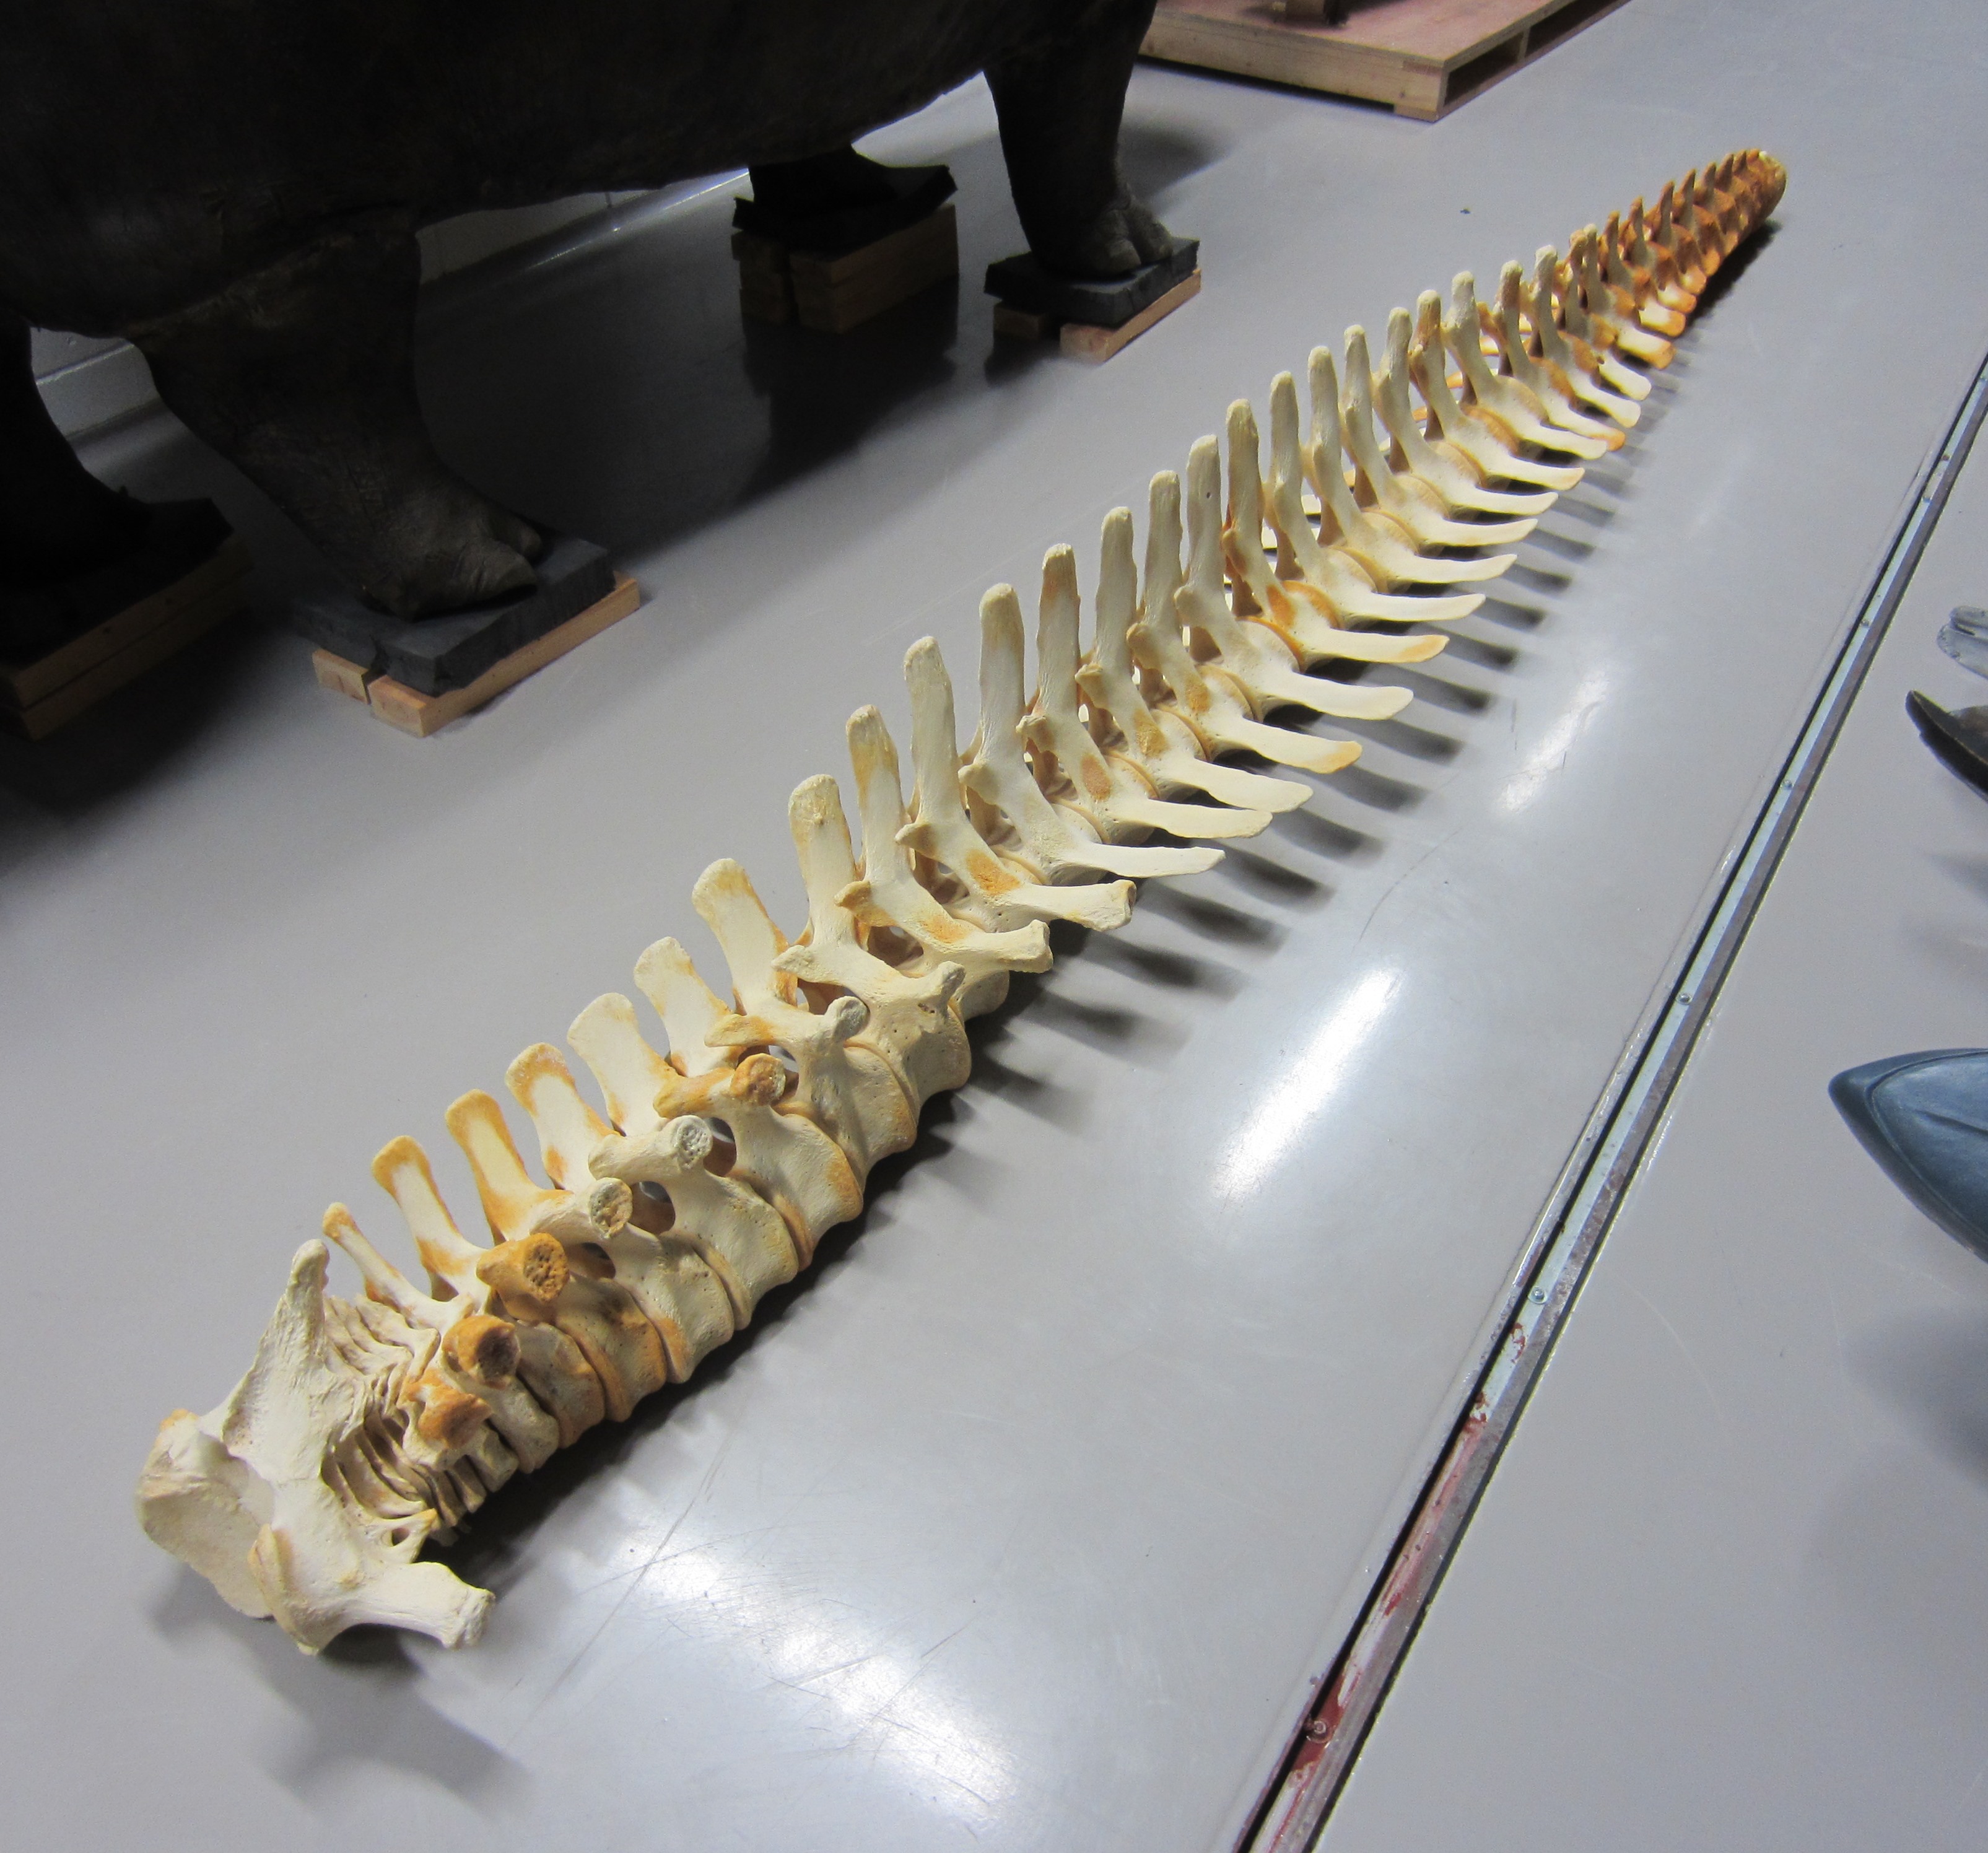 Lulu’s postcranial skeleton at the National Museums Collection Centre